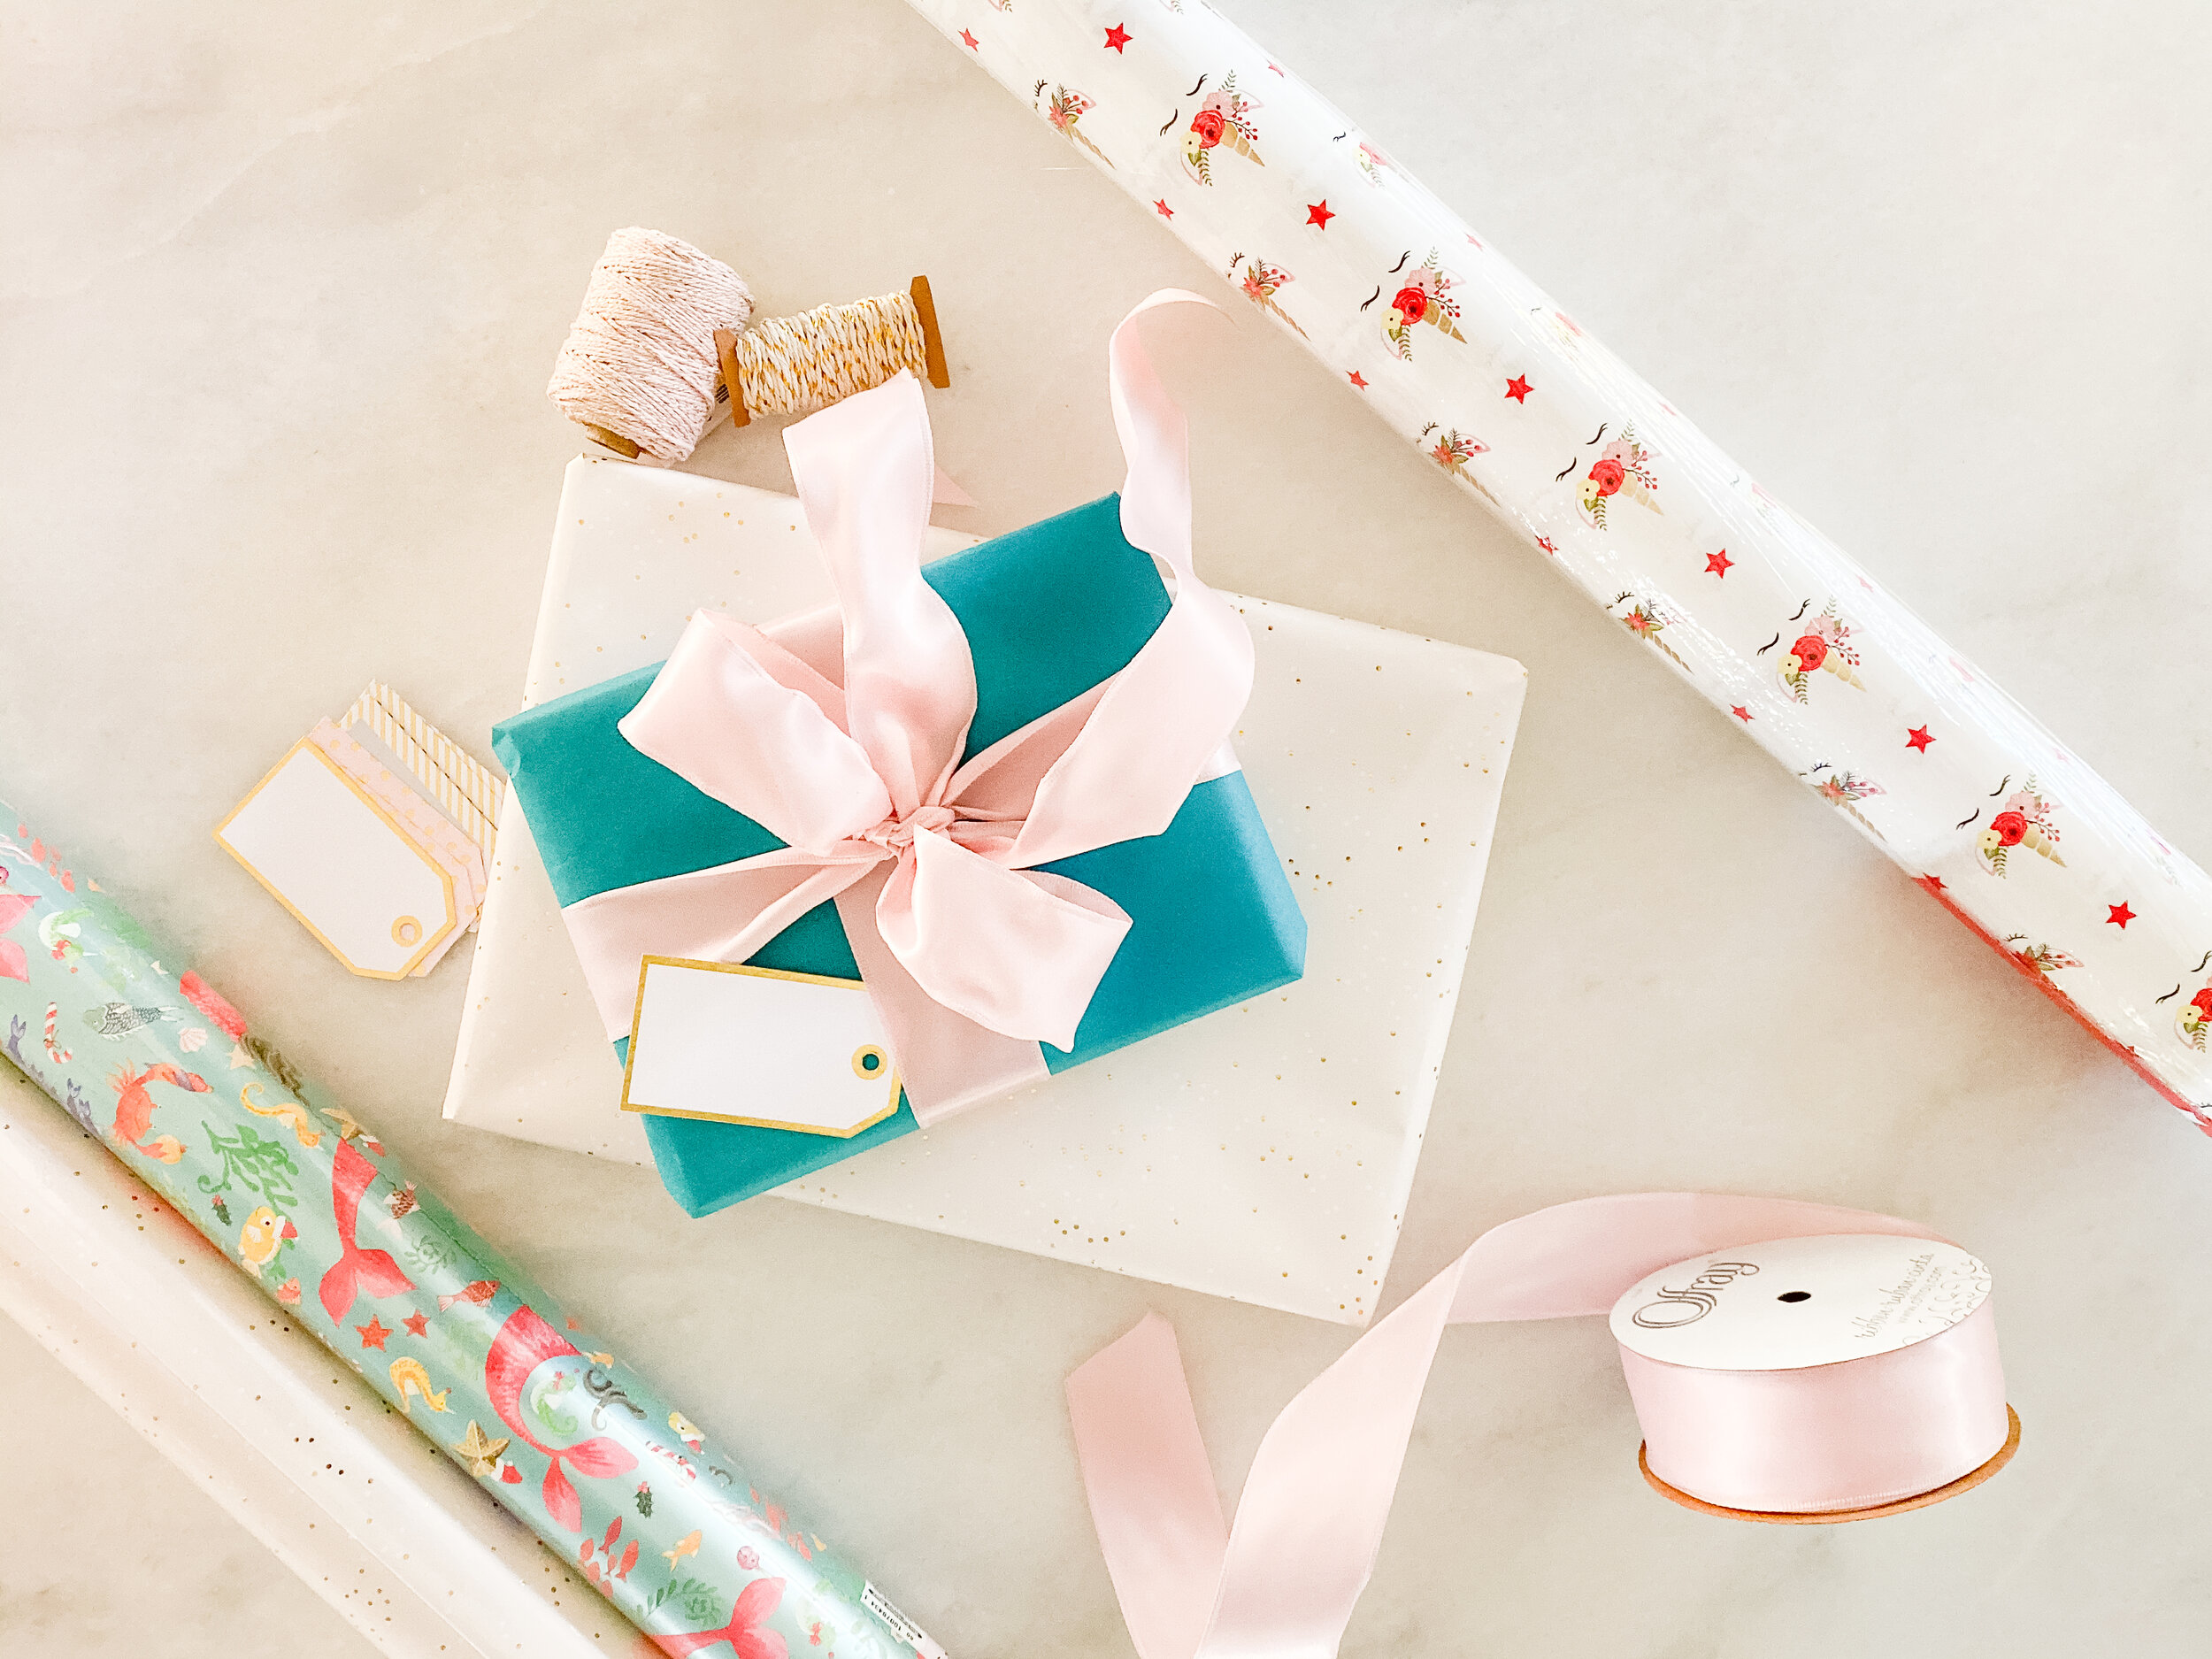 Out of wrapping paper? Here are Tips for Wrapping Gifts with Tissue Paper!